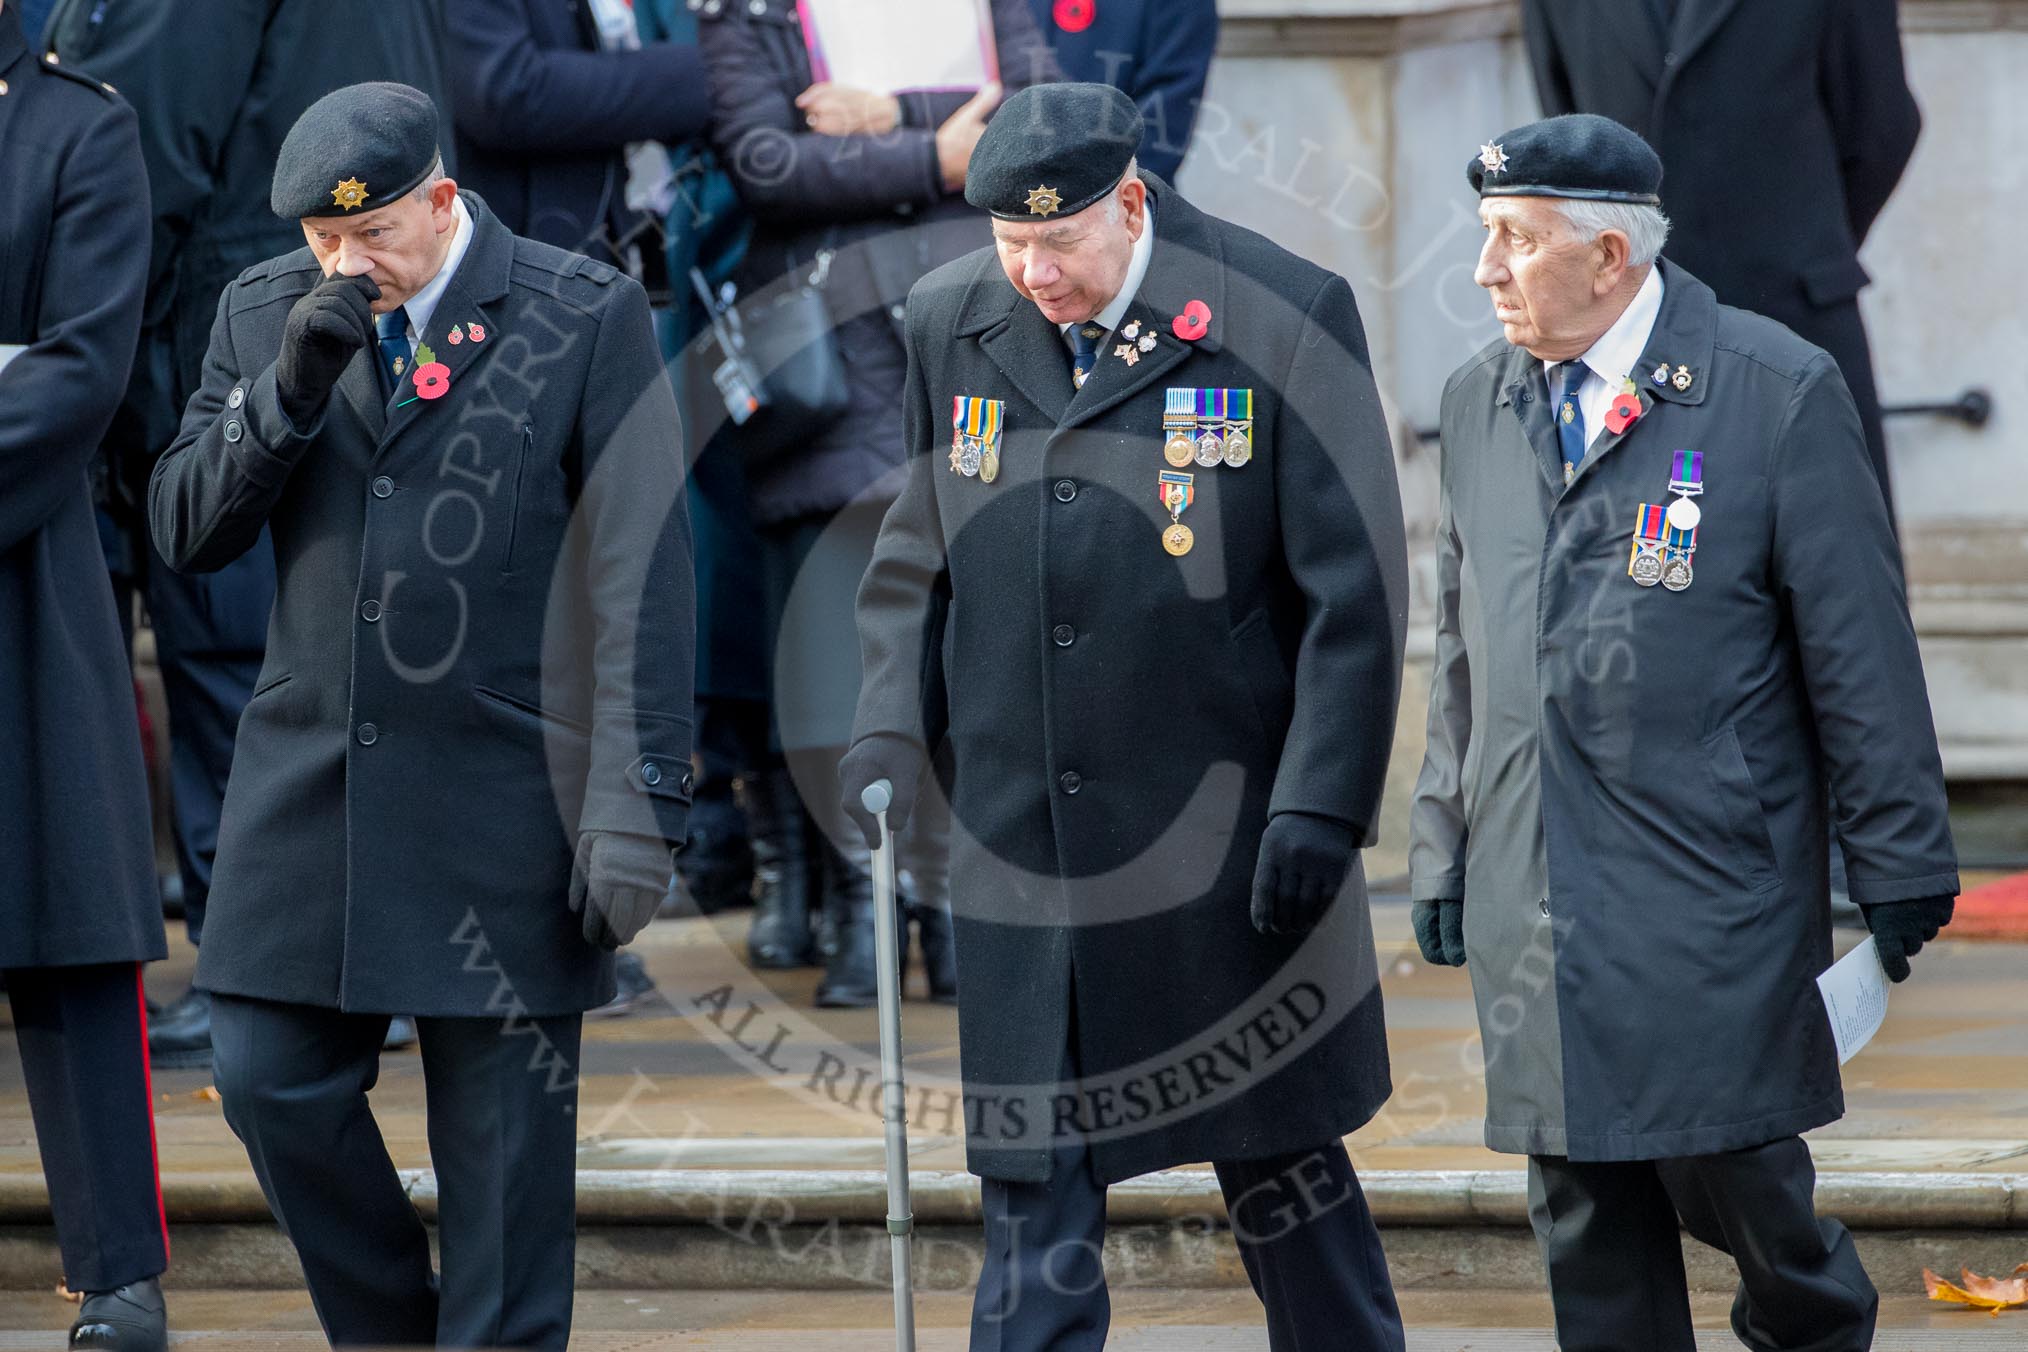 Three unidentified gentlemen (can anyone help?) leaving the Foreign and Commonwealth Office before the Remembrance Sunday Cenotaph Ceremony 2018 at Horse Guards Parade, Westminster, London, 11 November 2018, 10:35.